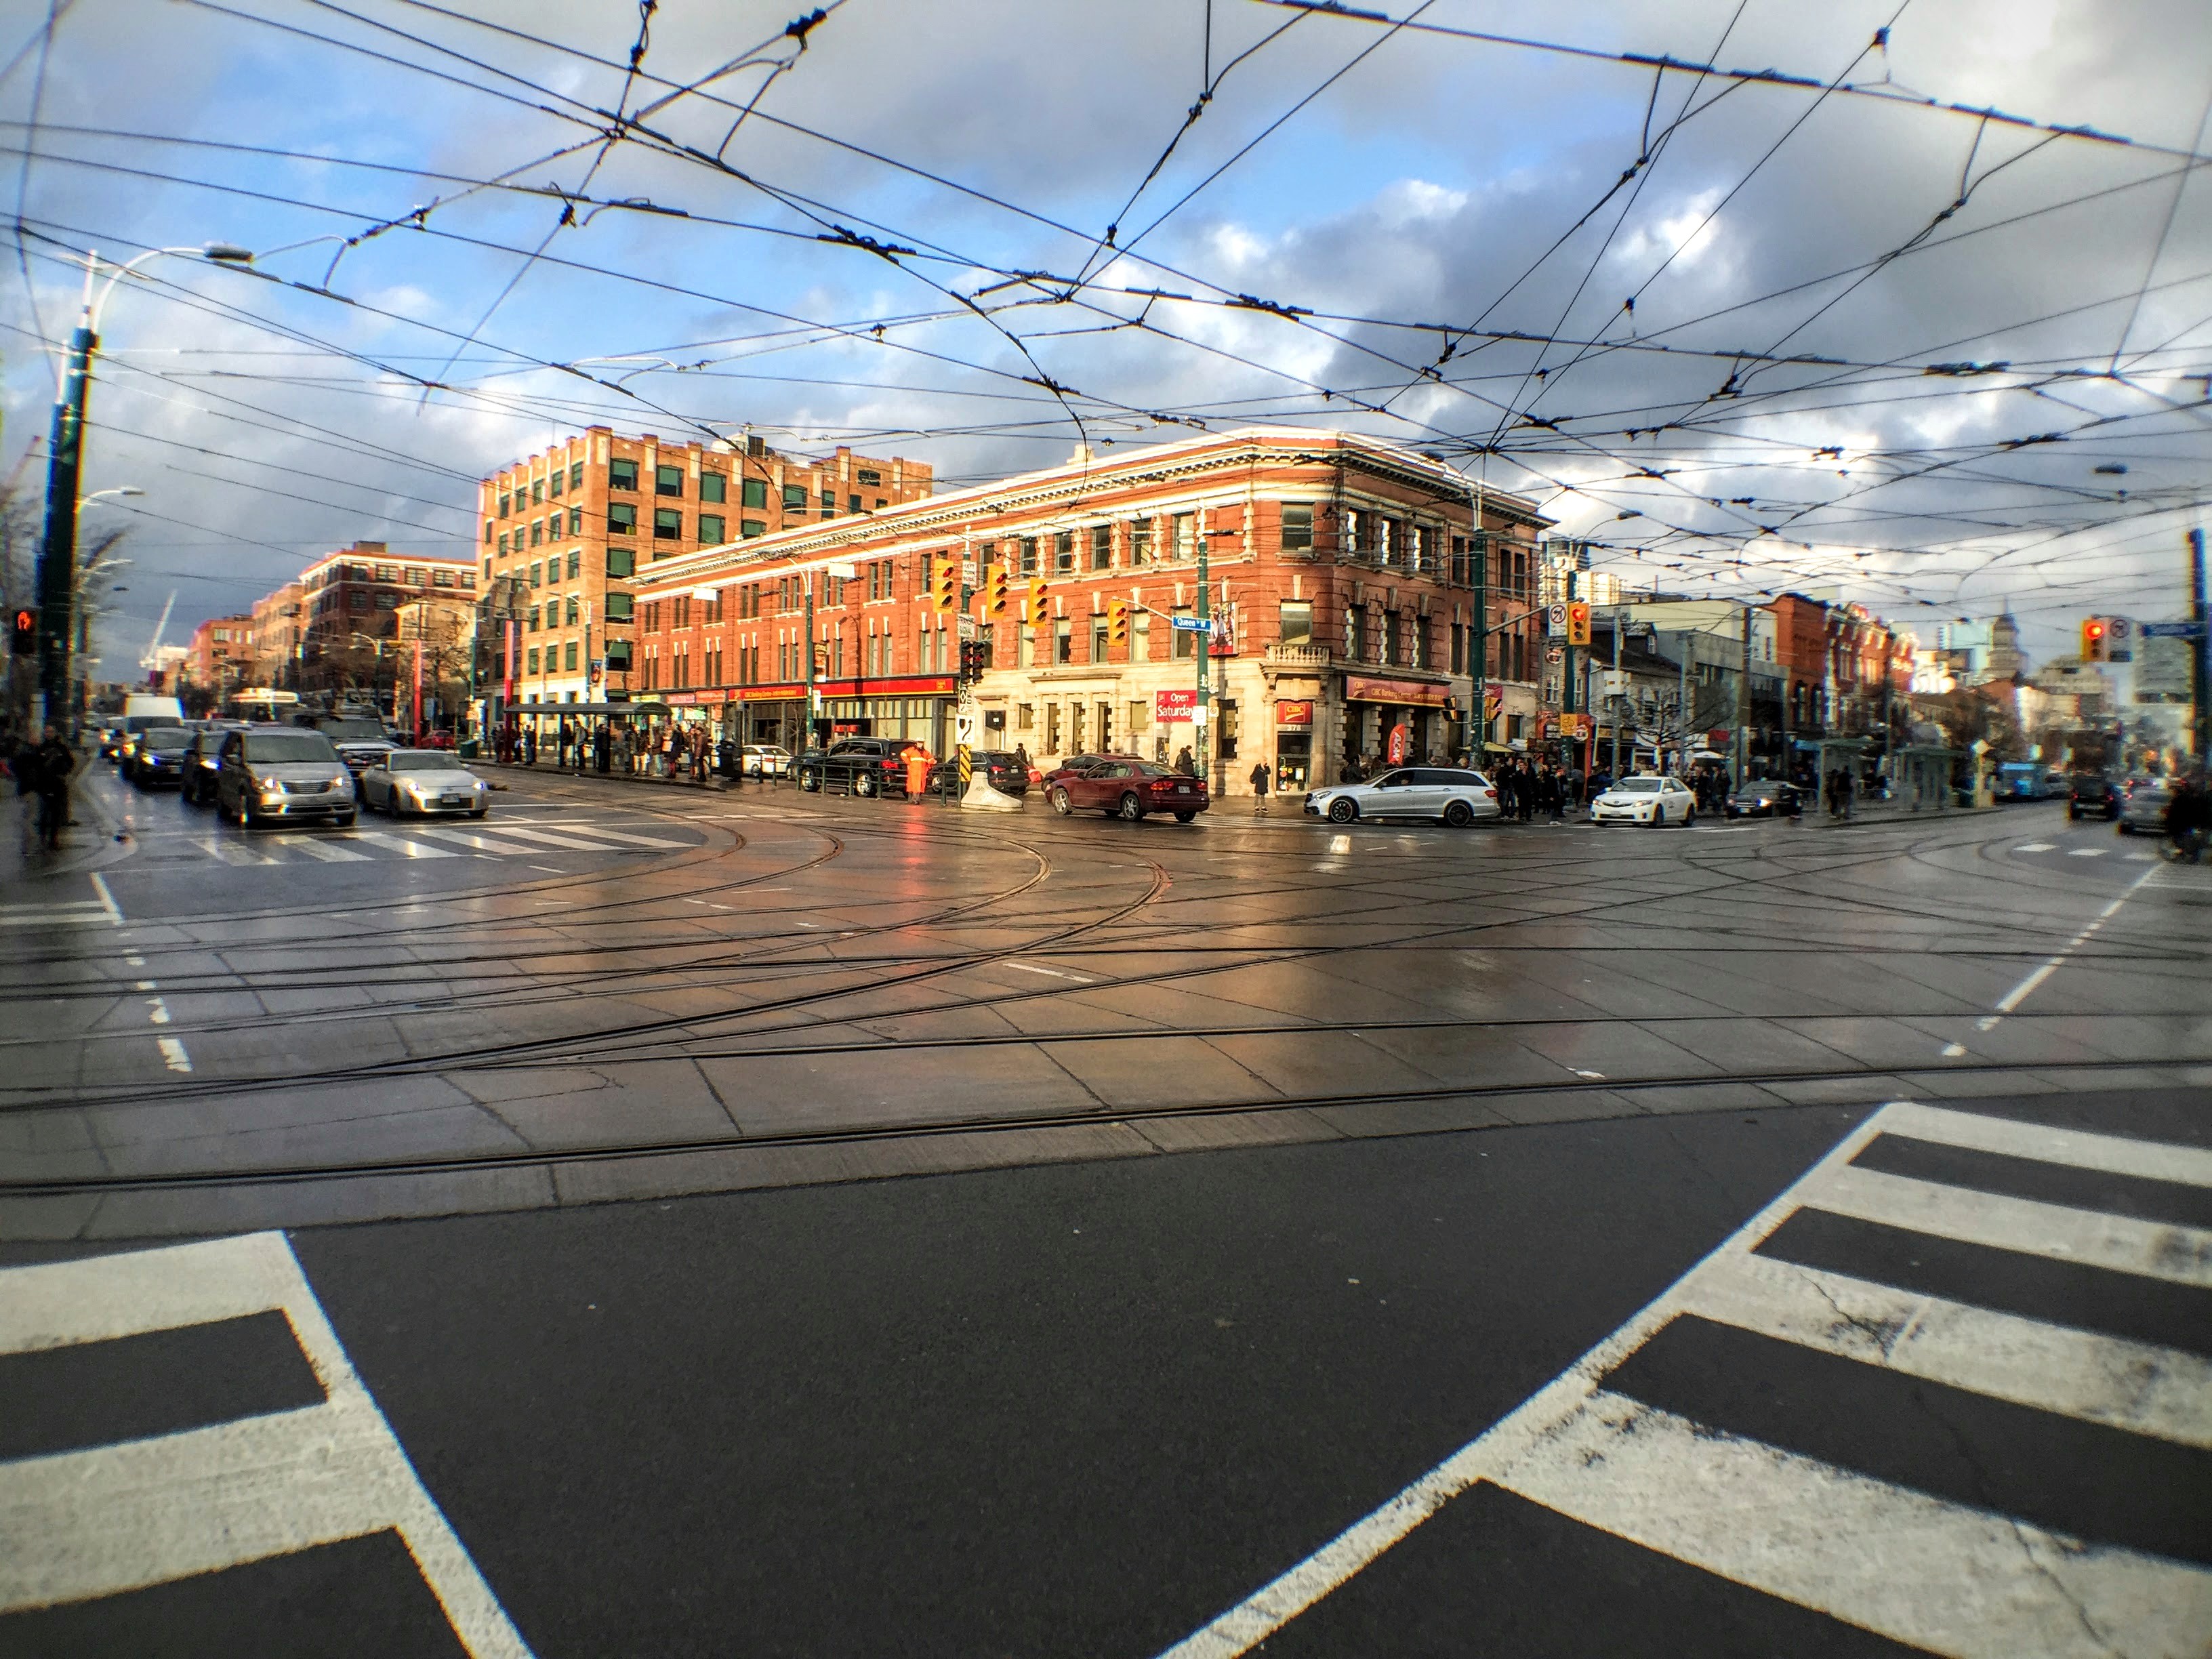 Toronto's Spadina and Queen intersection seen through the Olloclip's wide-angle lens.